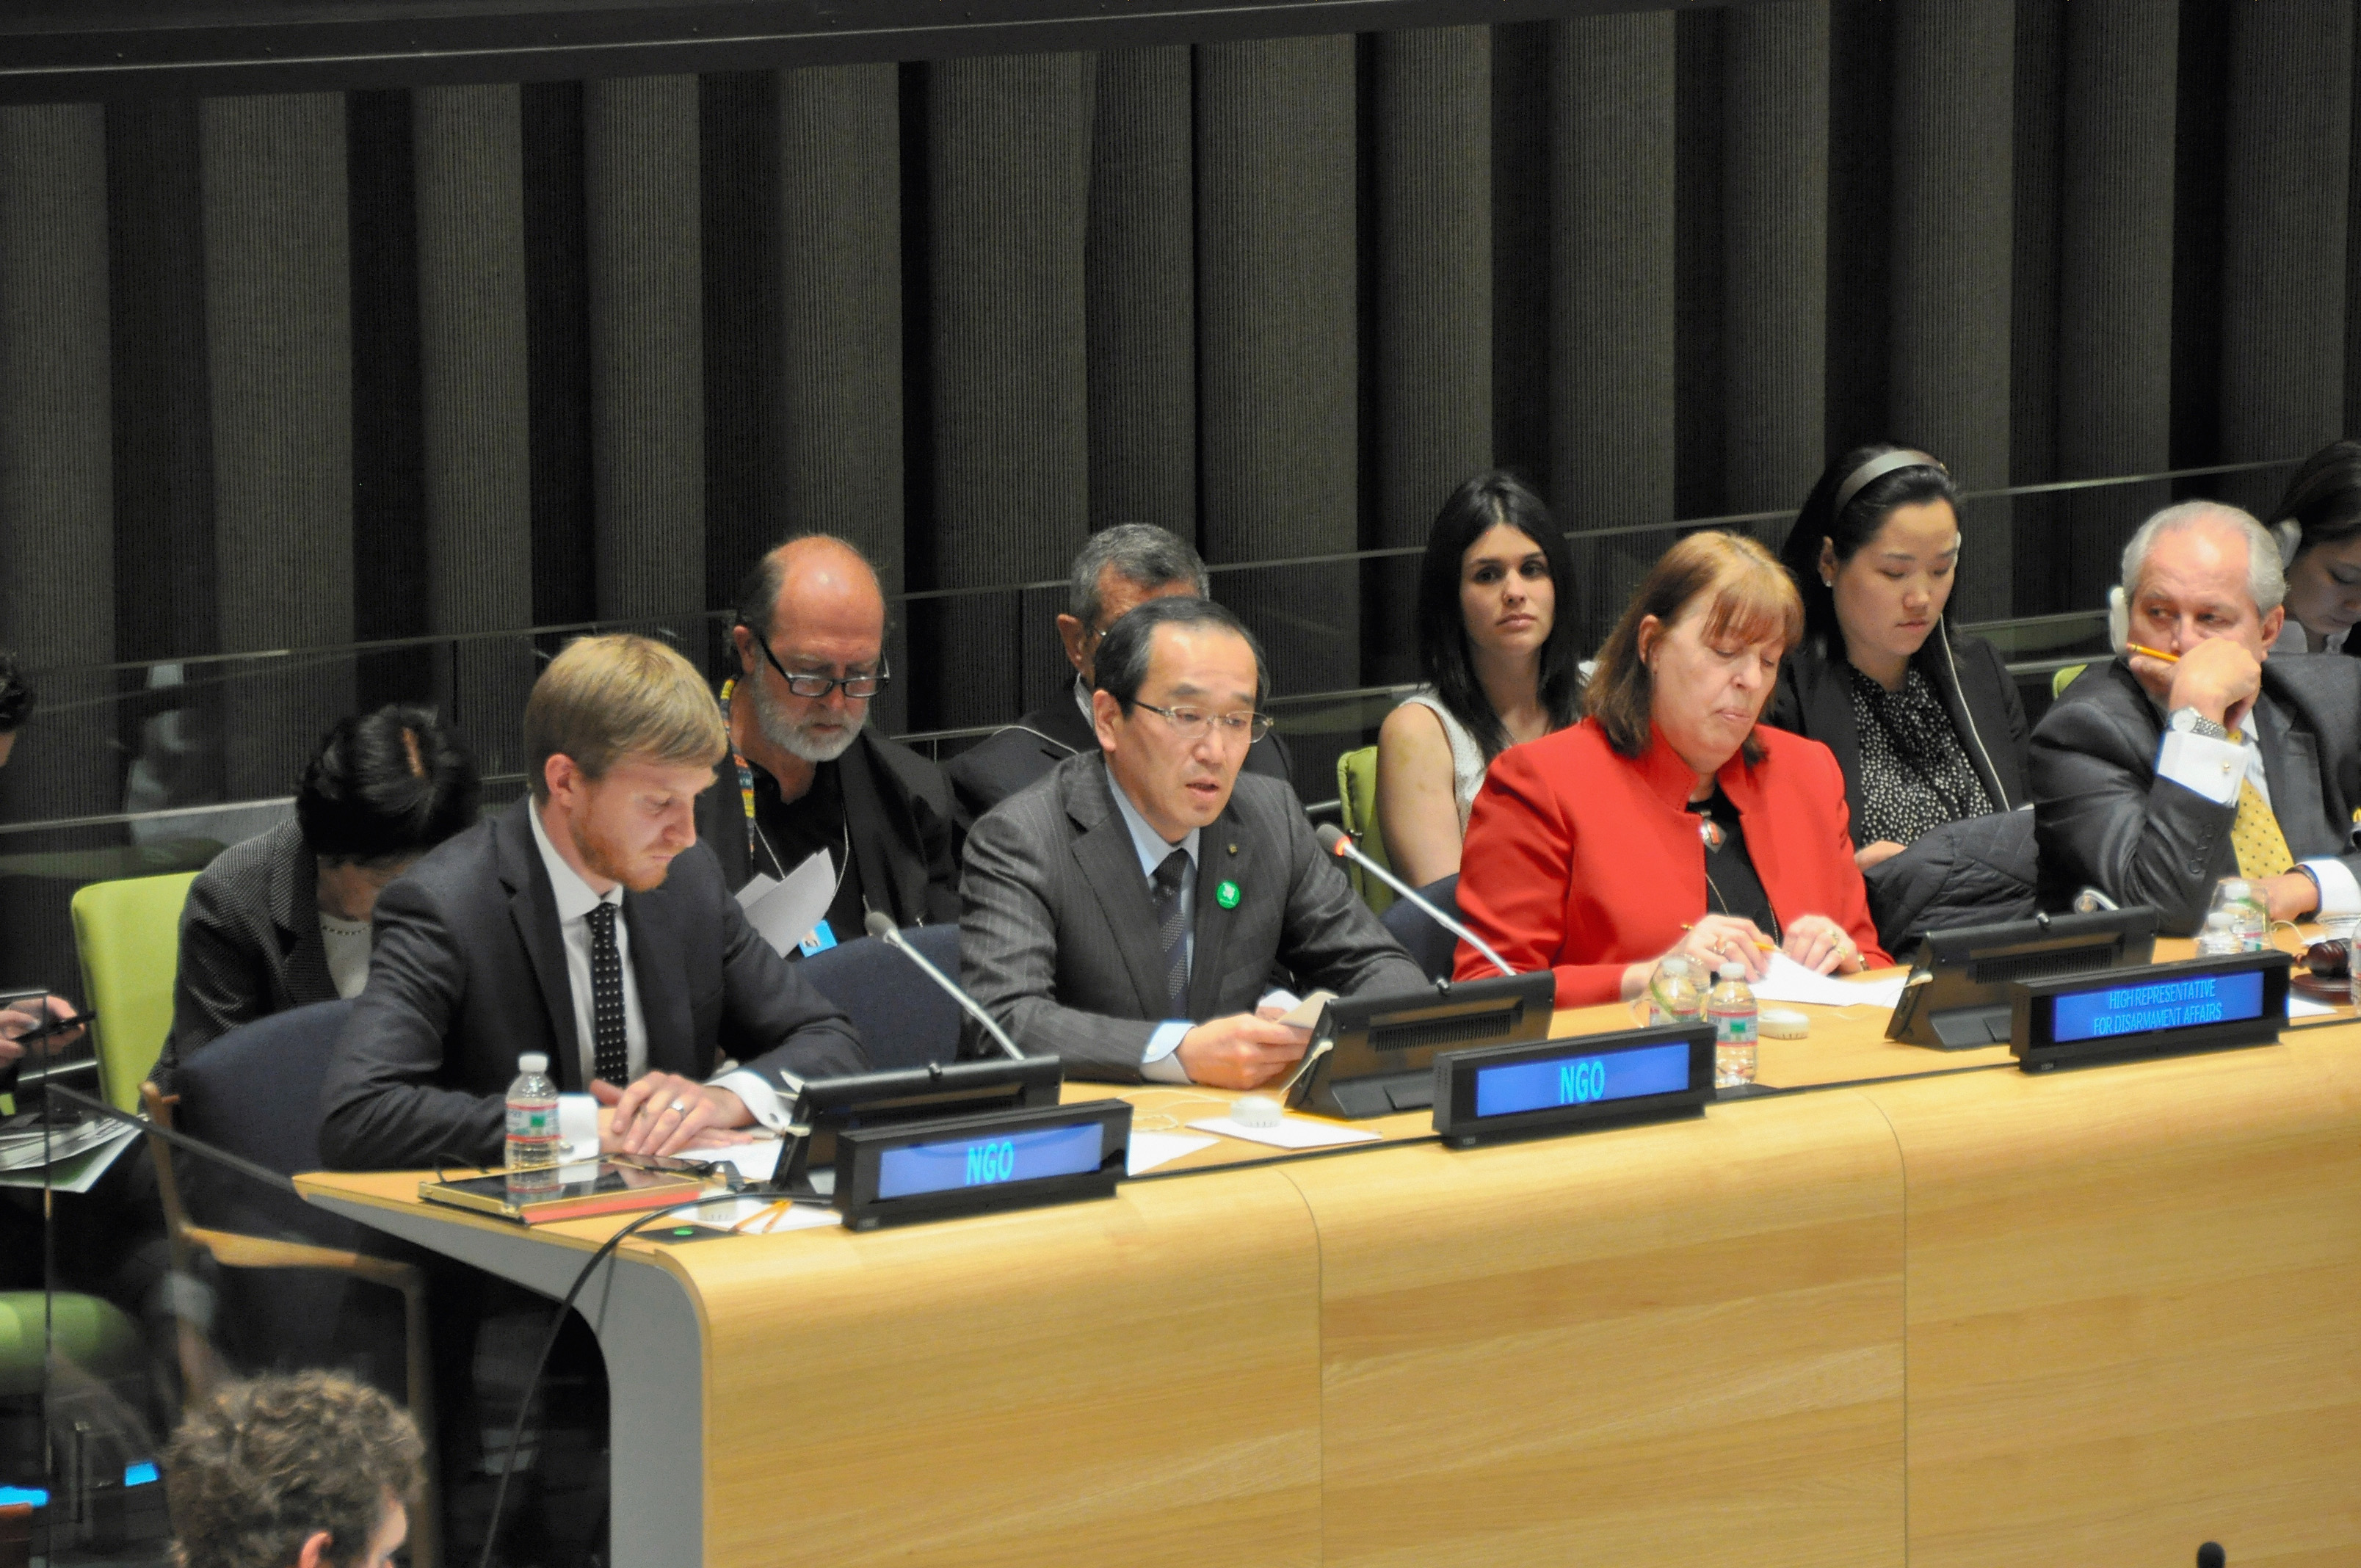 Hiroshima Mayor Kazumi Matsui (C) speaks during the third session of the Preparatory Committee for the 2015 Review Conference of the Parties to the Treaty on the Non-Proliferation of Nuclear Weapons at the U.N. headquarters on April 29, 2014 in New York City. (The Asahi Shimbun&mdash;2014 The Asahi Shimbun)